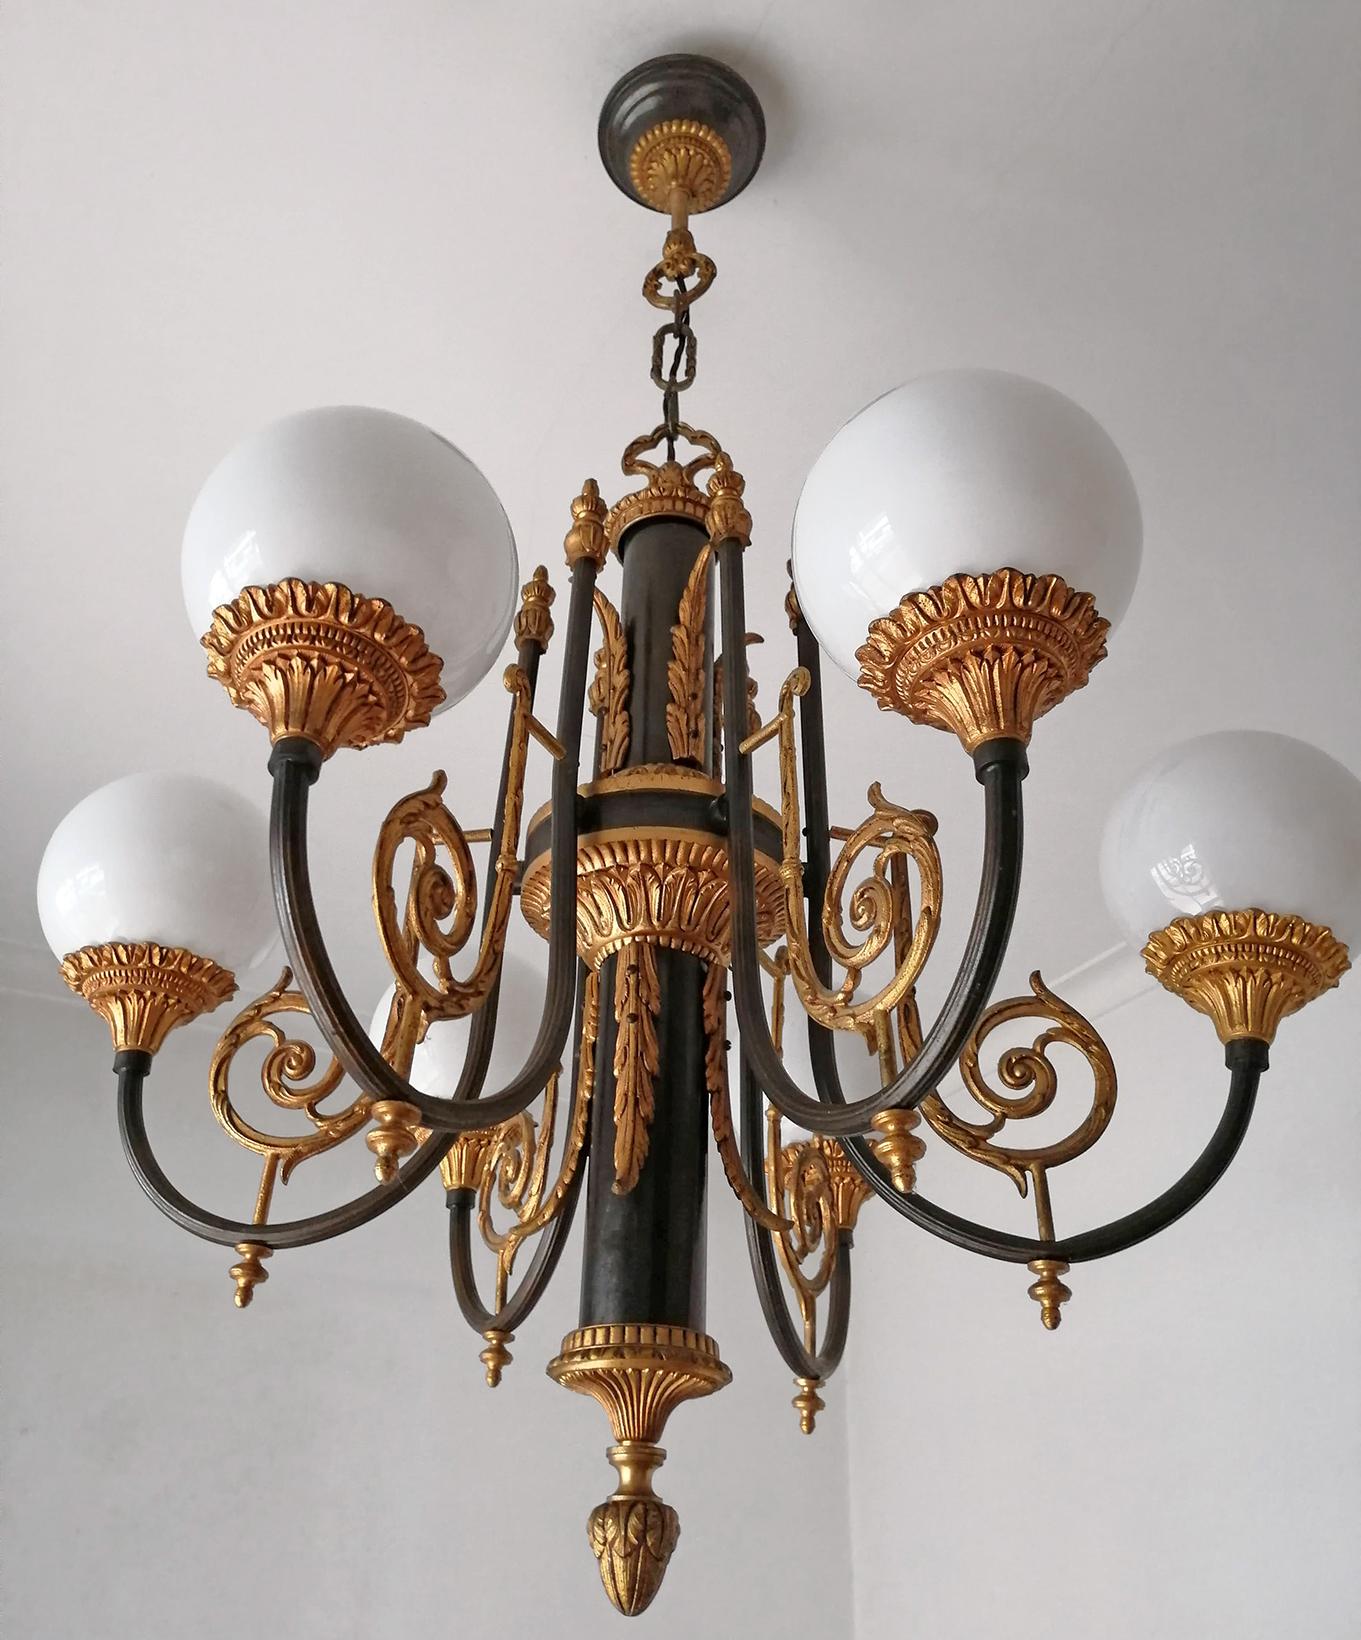 Antique French Empire Neoclassical Gilt & Patina Bronze Opaline Globe Chandelier For Sale 2